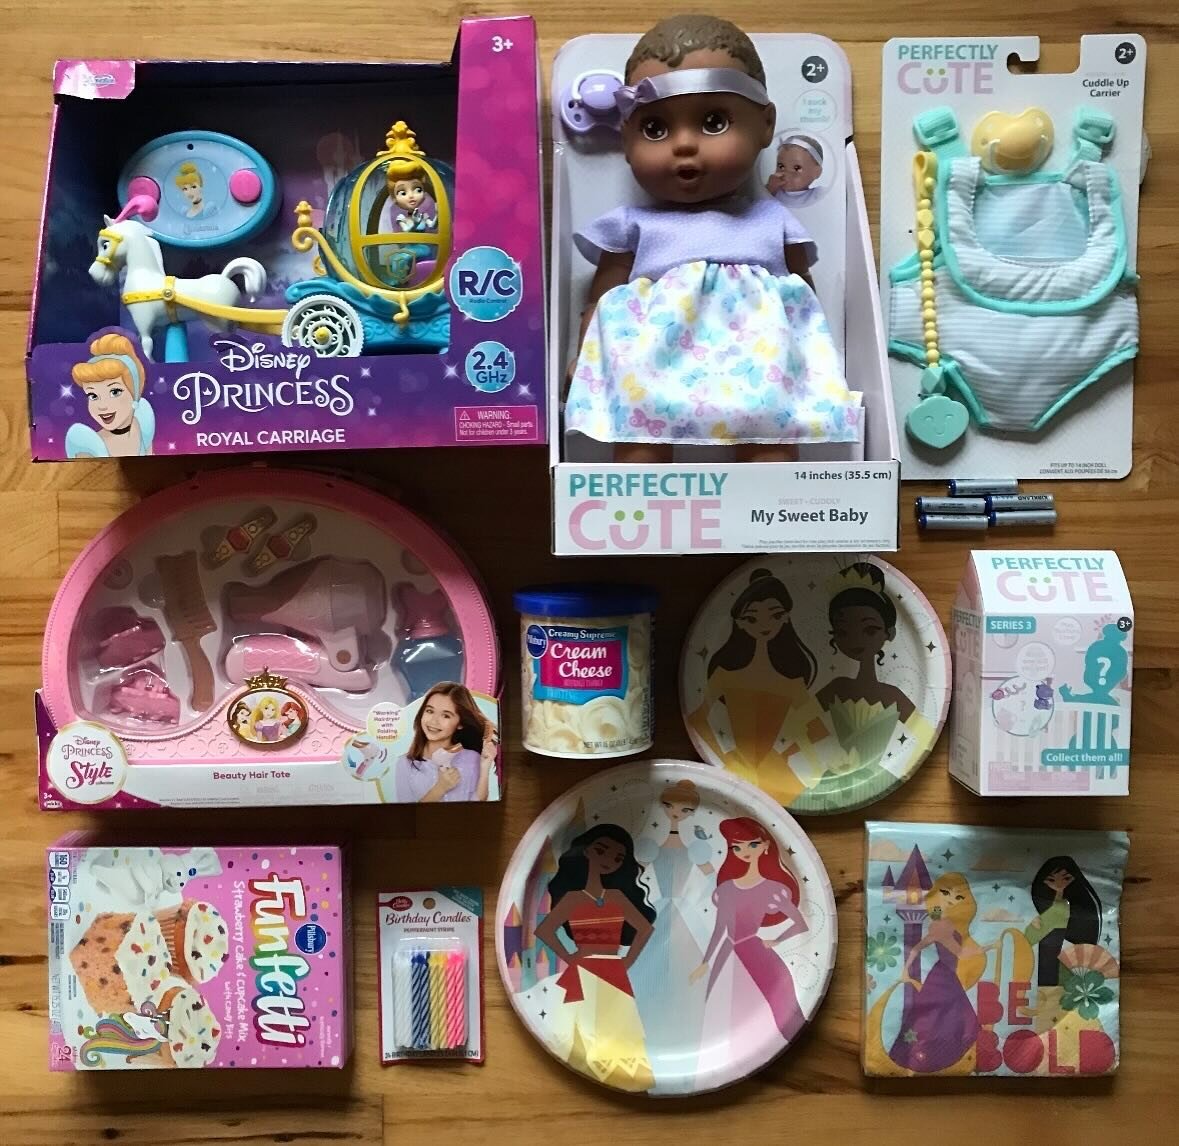 &ldquo;My children mean the world to me. Unfortunately, I rarely have extra money to spend on my children. She deserves this because she is an amazing kid. If I could receive this help I would be beyond grateful.&rdquo;

This newest Birthday Kit is f